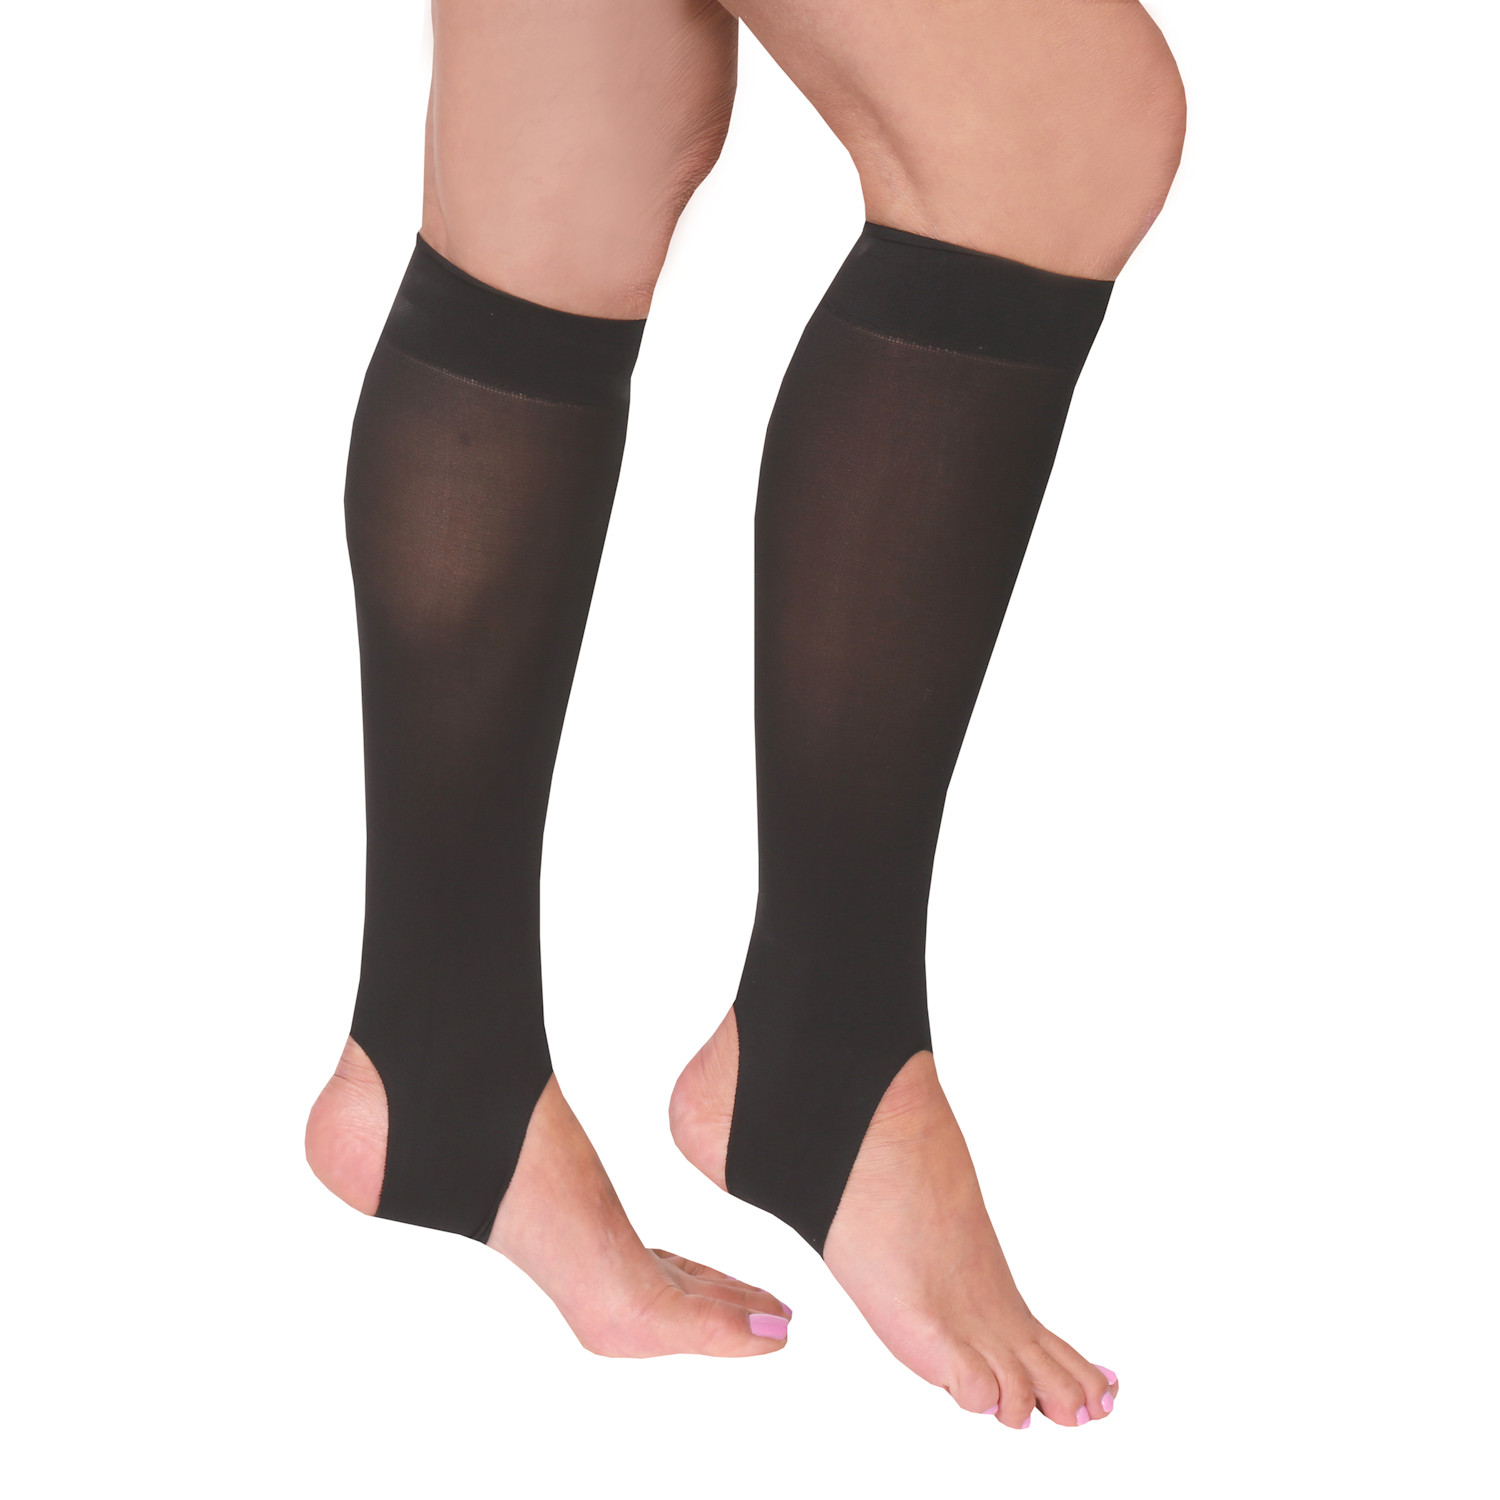 Support Plus® Women's Light Compression Stirrup Knee-Highs | Support Plus